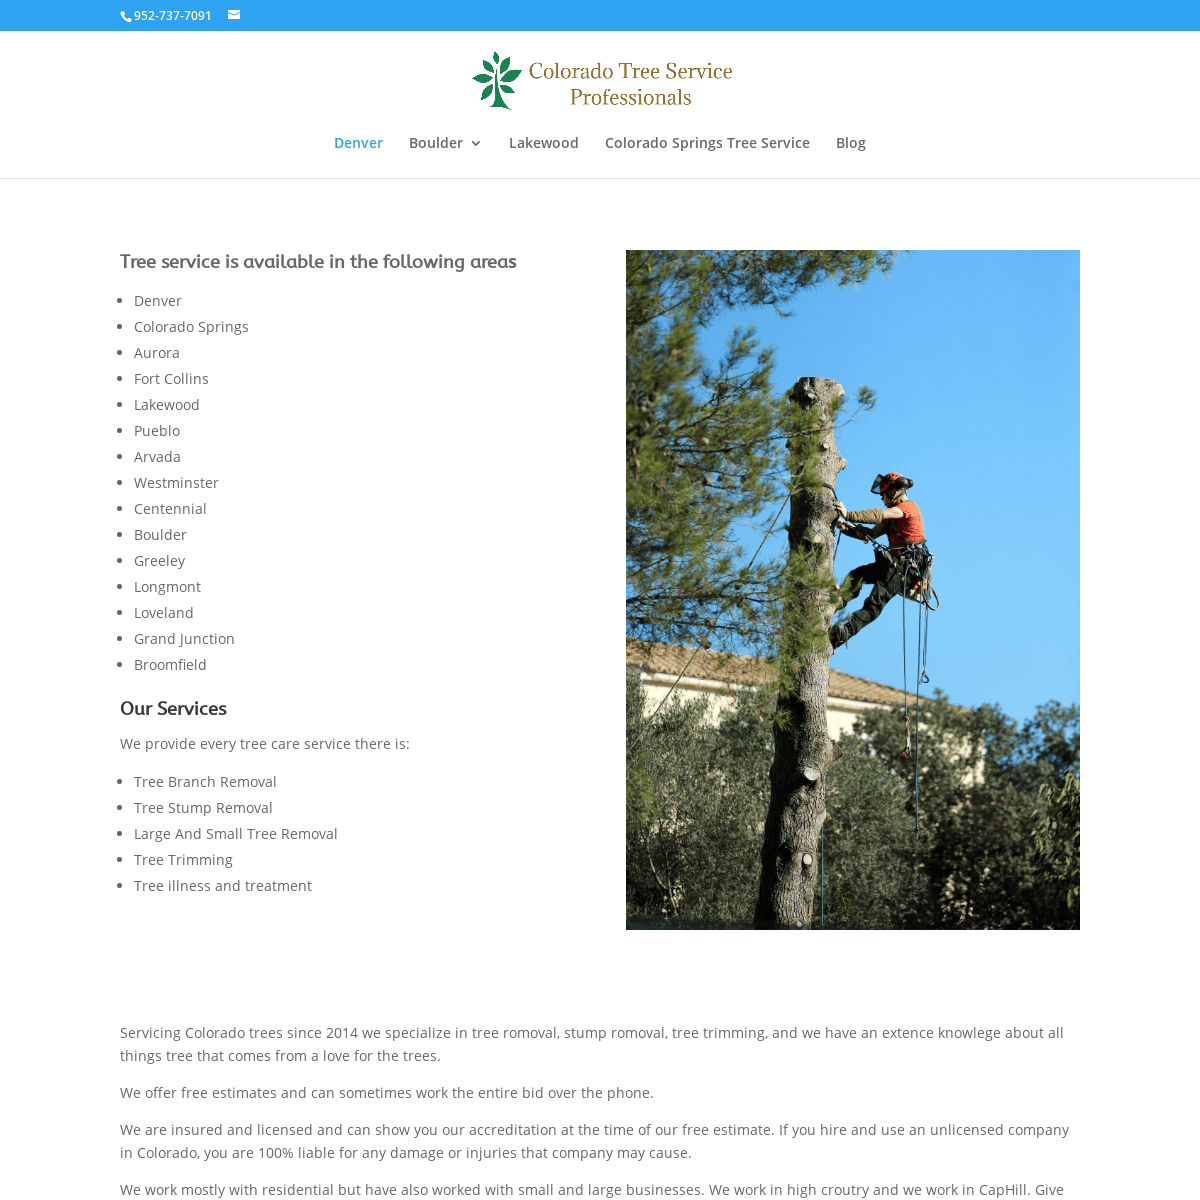 A complete backup of https://cotreeservice.com